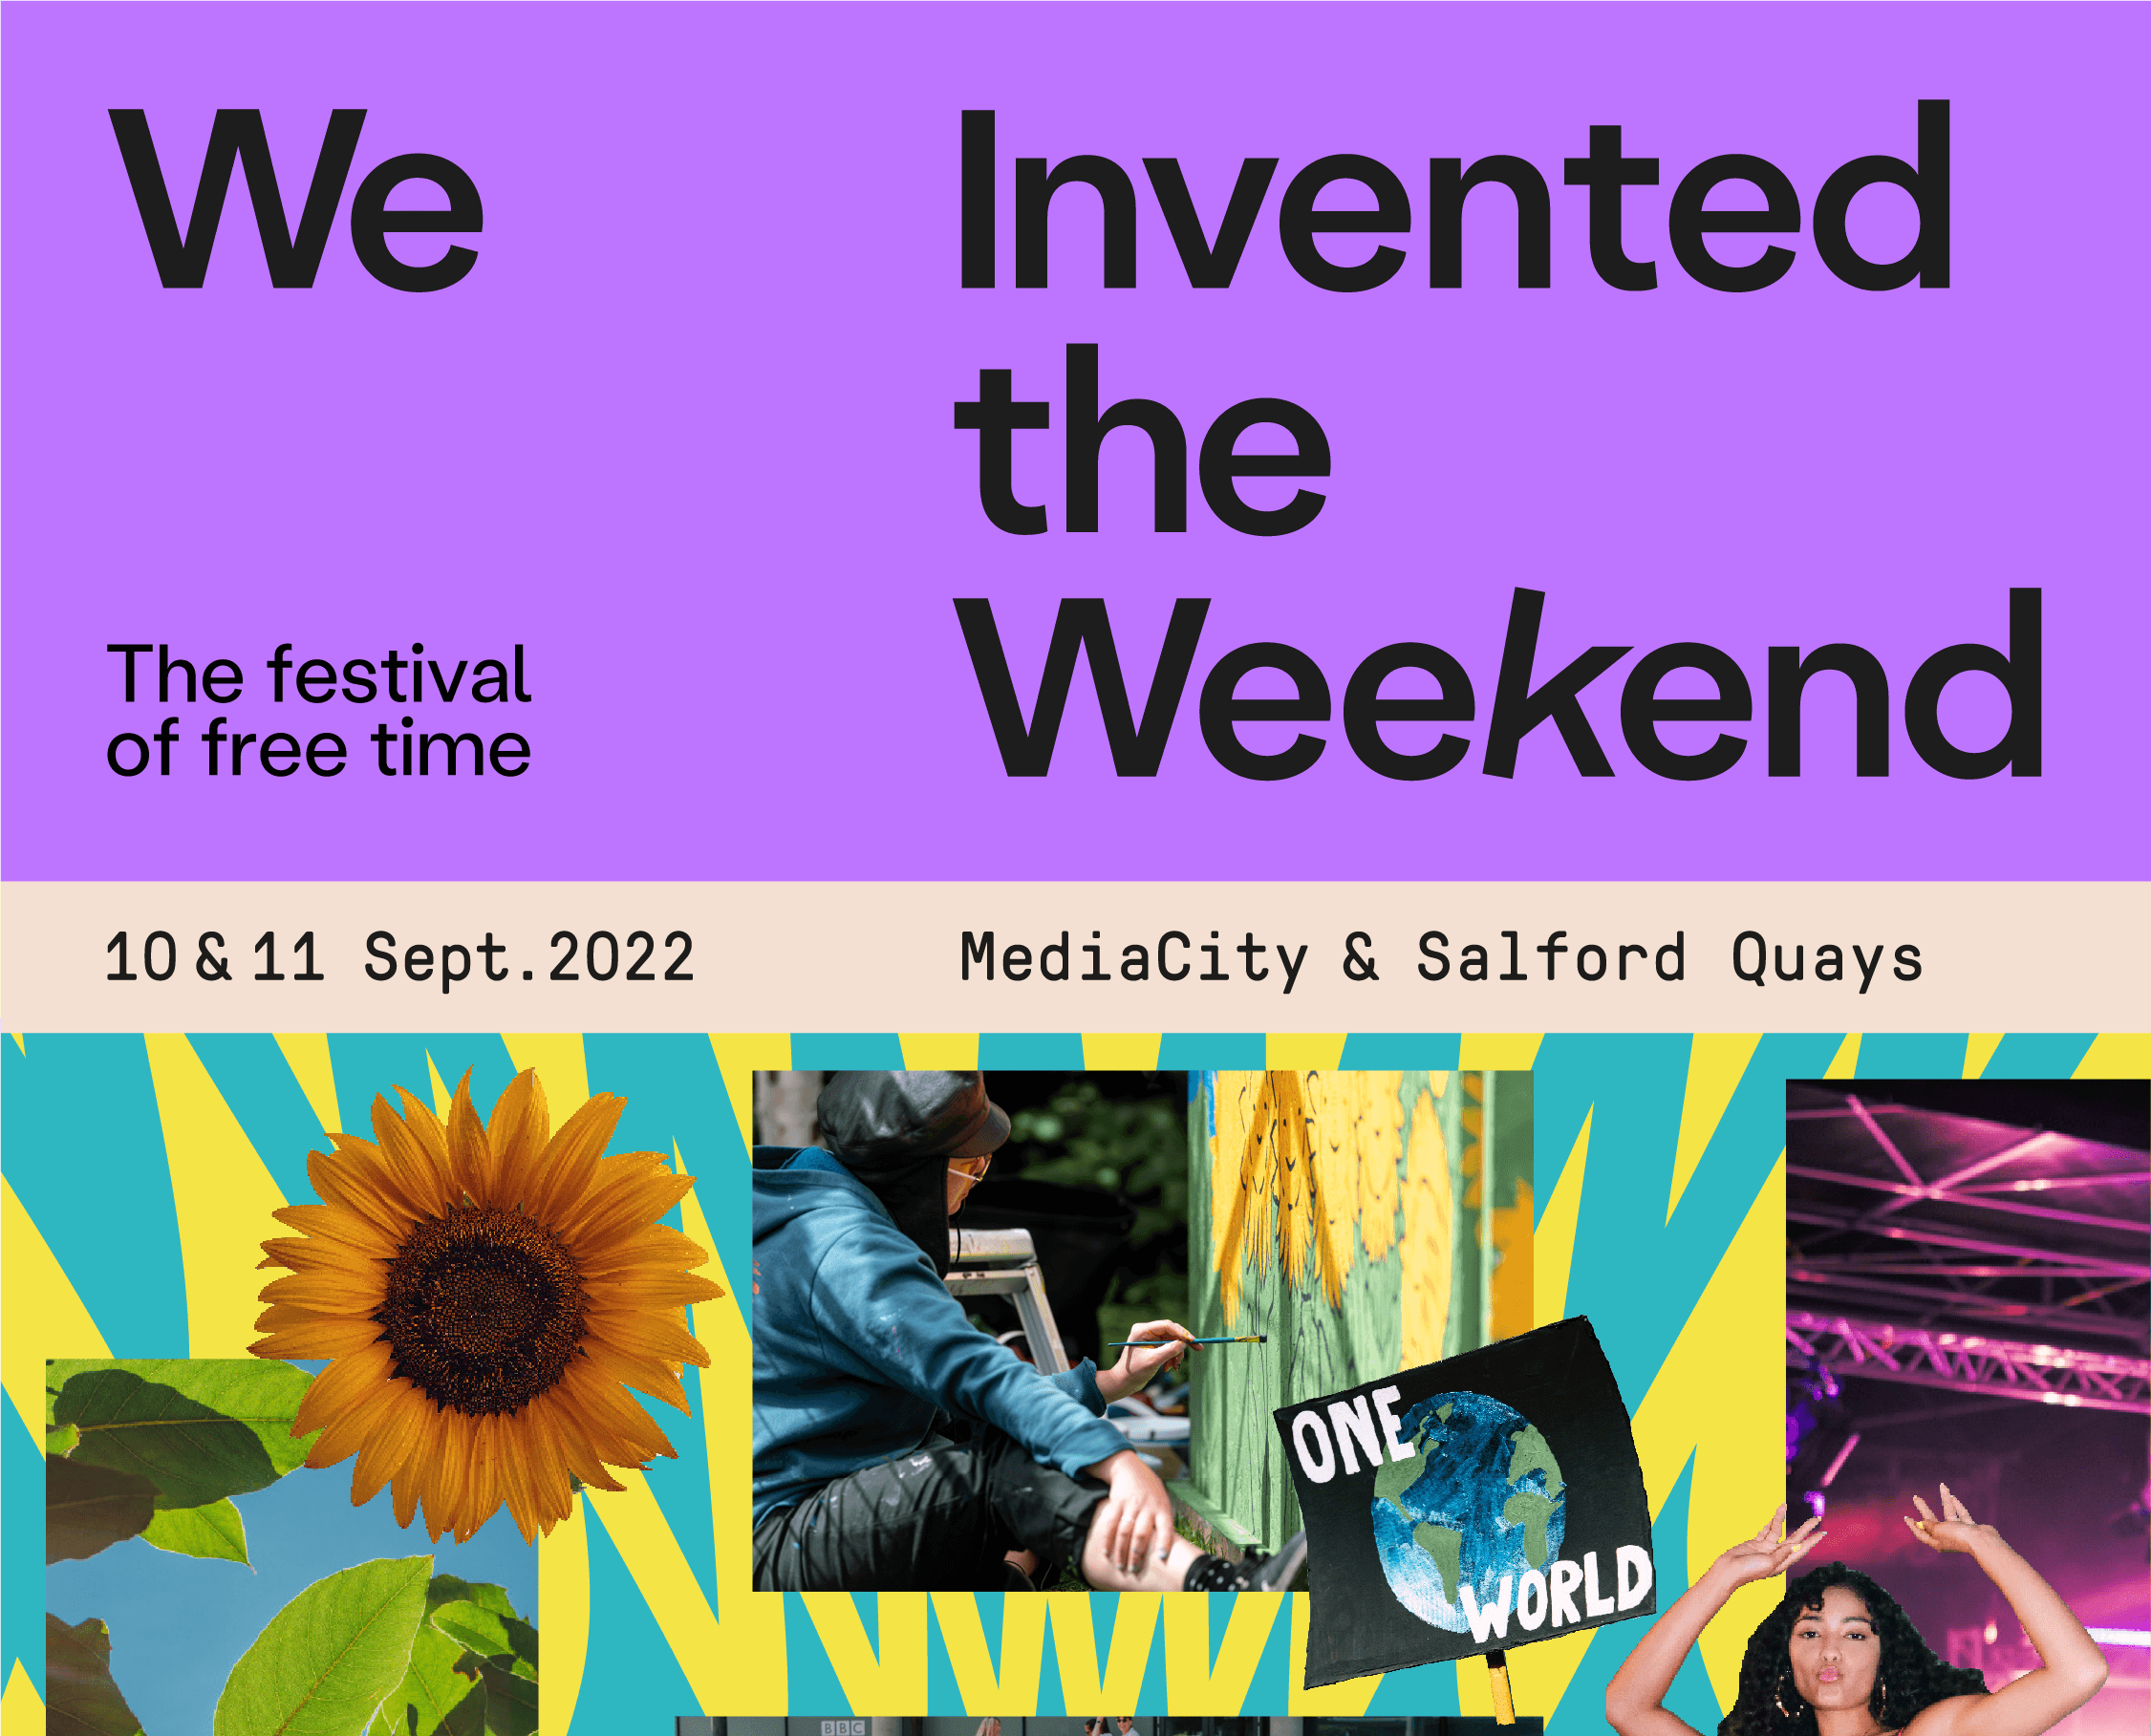 we-invented-the-weekend-programme-of-events-media-city-uk